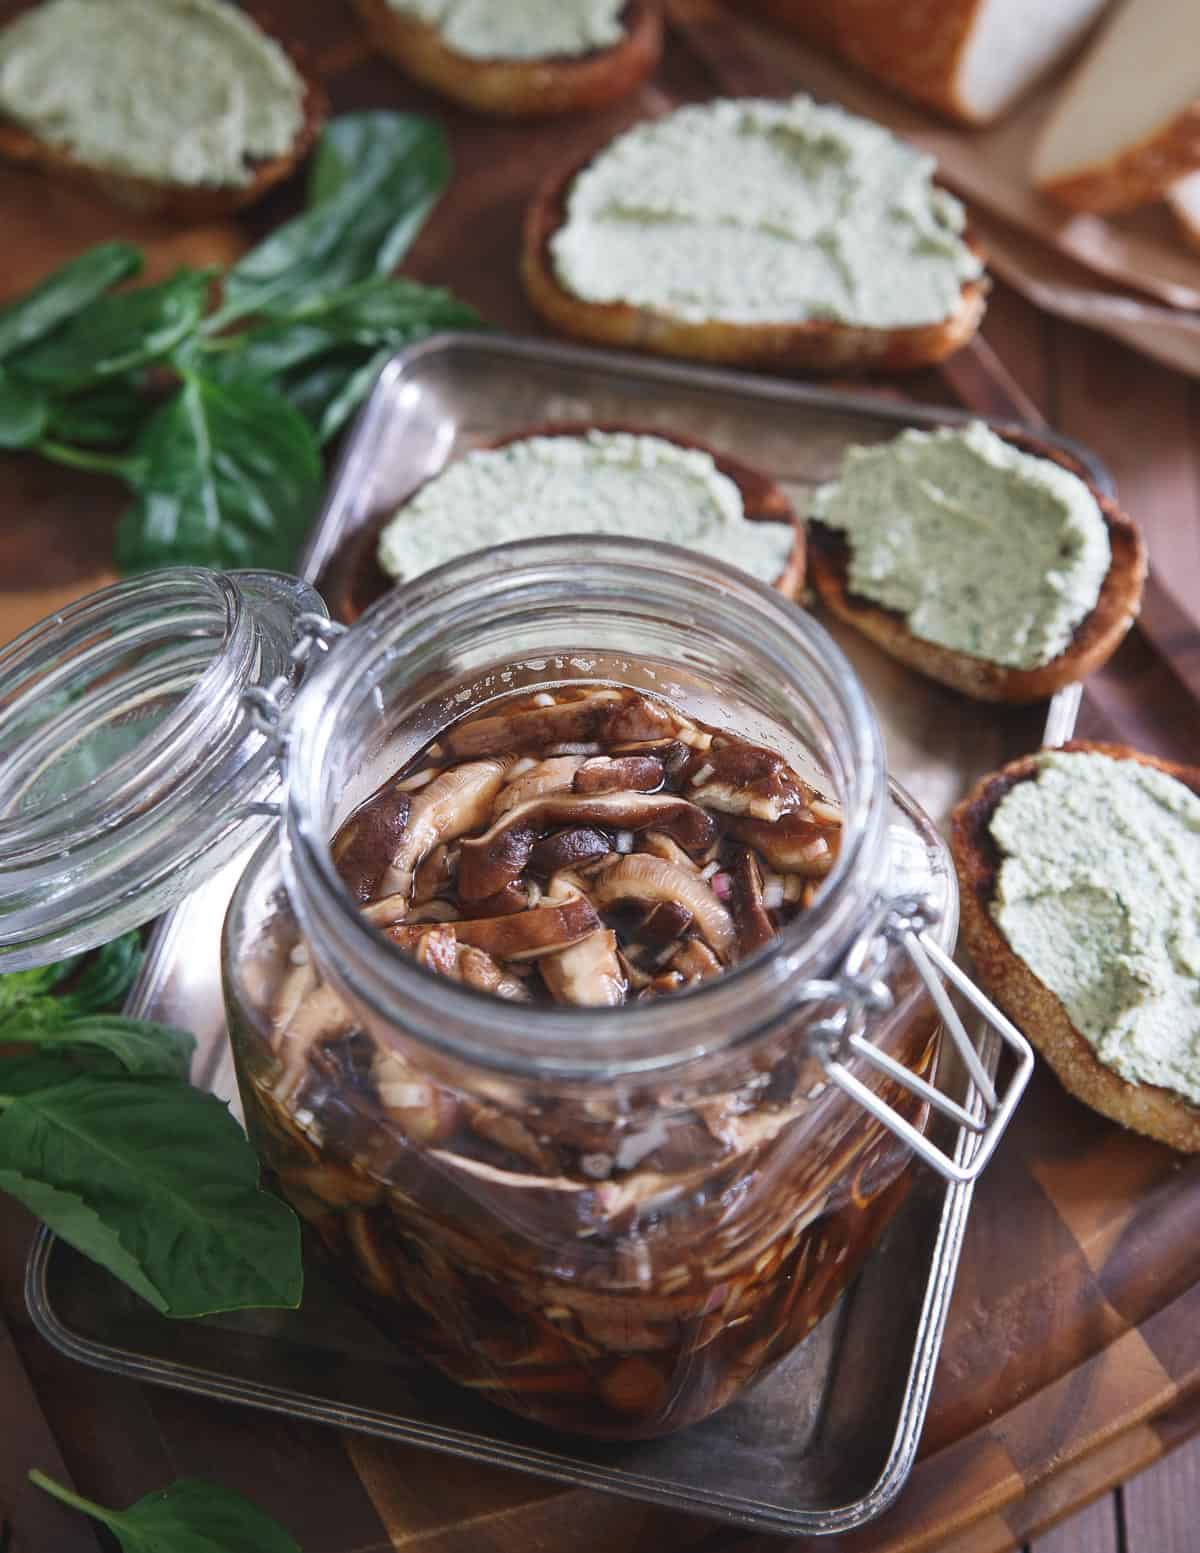 Balsamic Pickled Shiitake Mushrooms are a tangy bite perfect on top of some toasted bread.